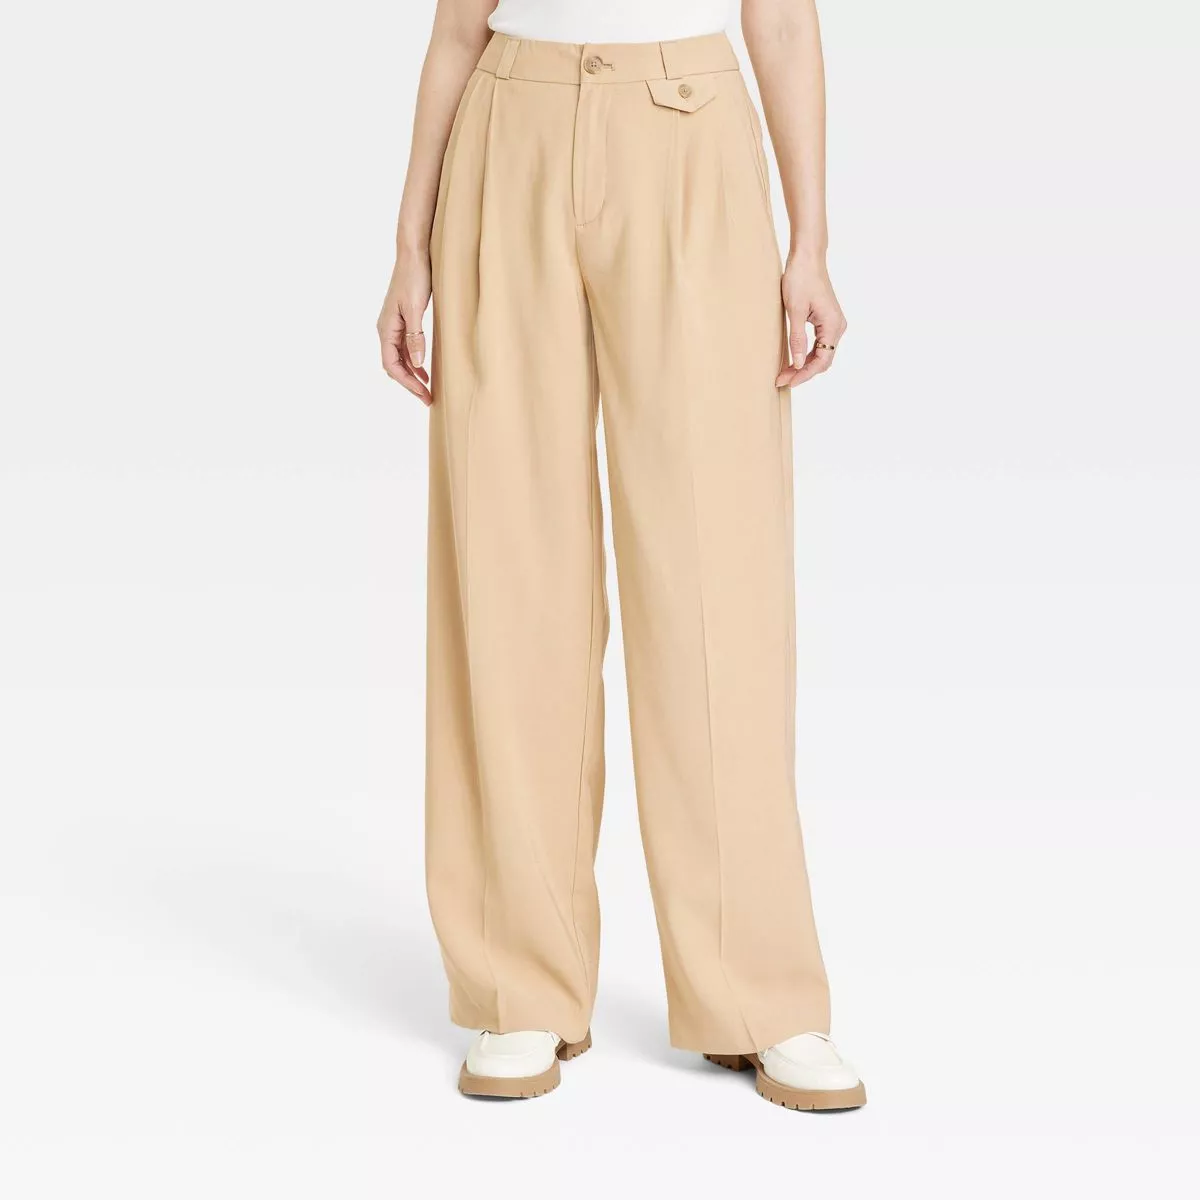 Women's High-Rise Relaxed Fit Full Length Baggy Wide Leg Trousers